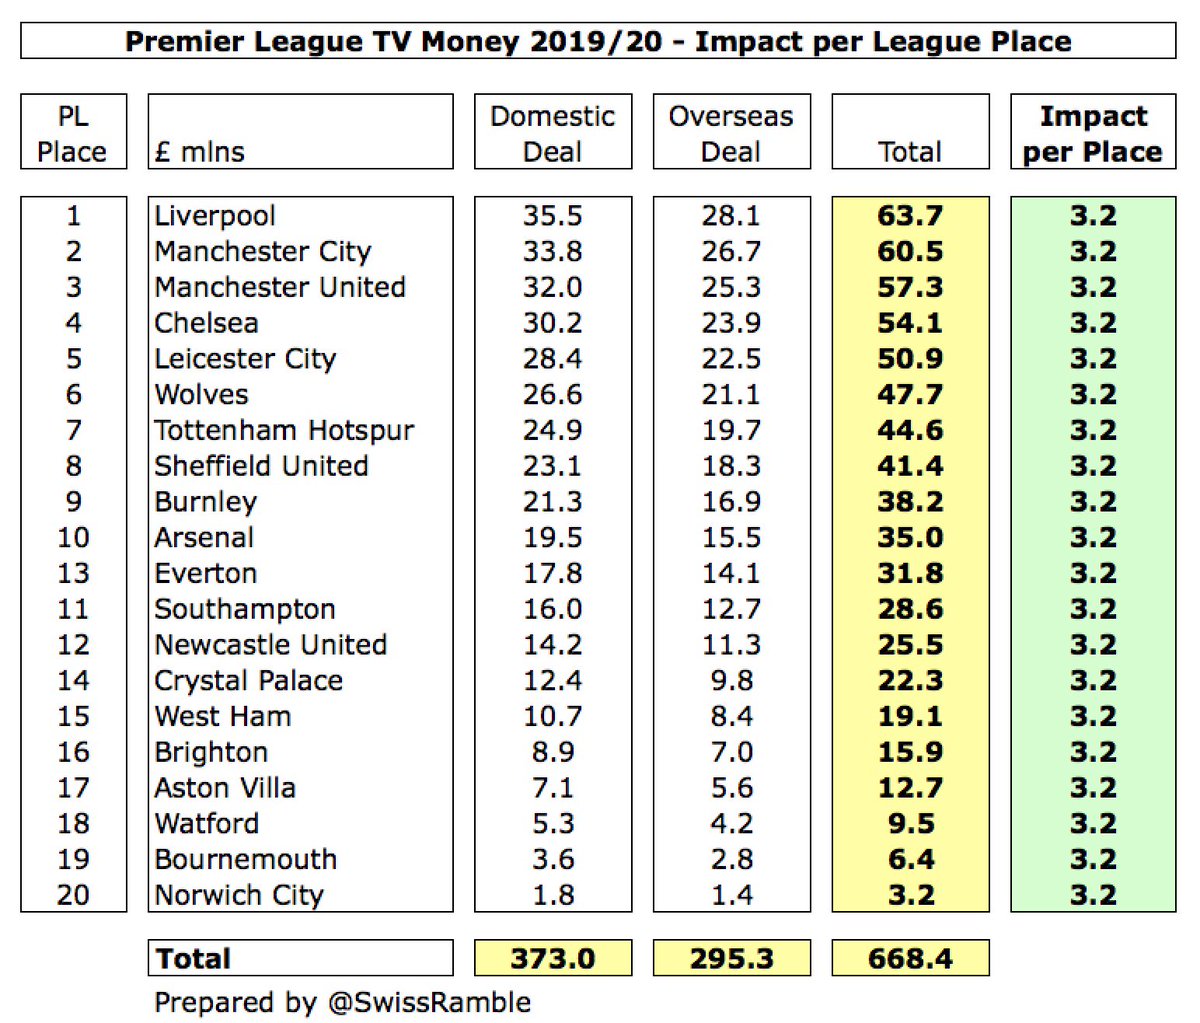 This means that the amount of money distributed based on league position has significantly increased to £668m, comprising domestic rights £373m plus overseas rights £295m. In this way, each league position in 2019/20 is worth £3.2m (up from £1.9m in 2018/19).